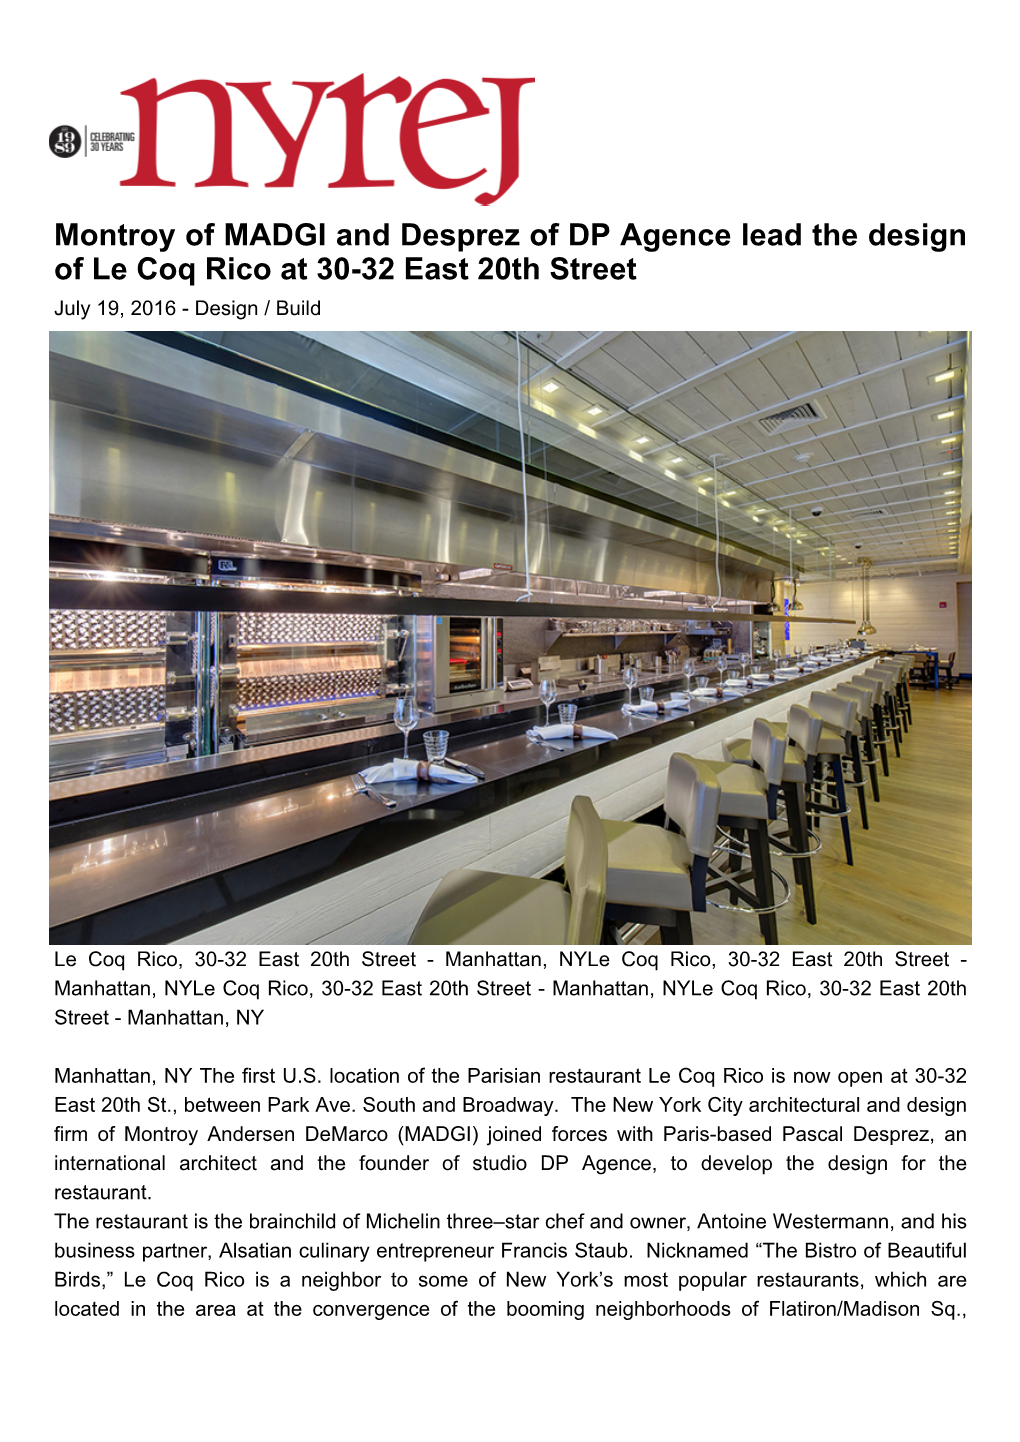 Montroy of MADGI and Desprez of DP Agence Lead the Design of Le Coq Rico at 30-32 East 20Th Street July 19, 2016 - Design / Build